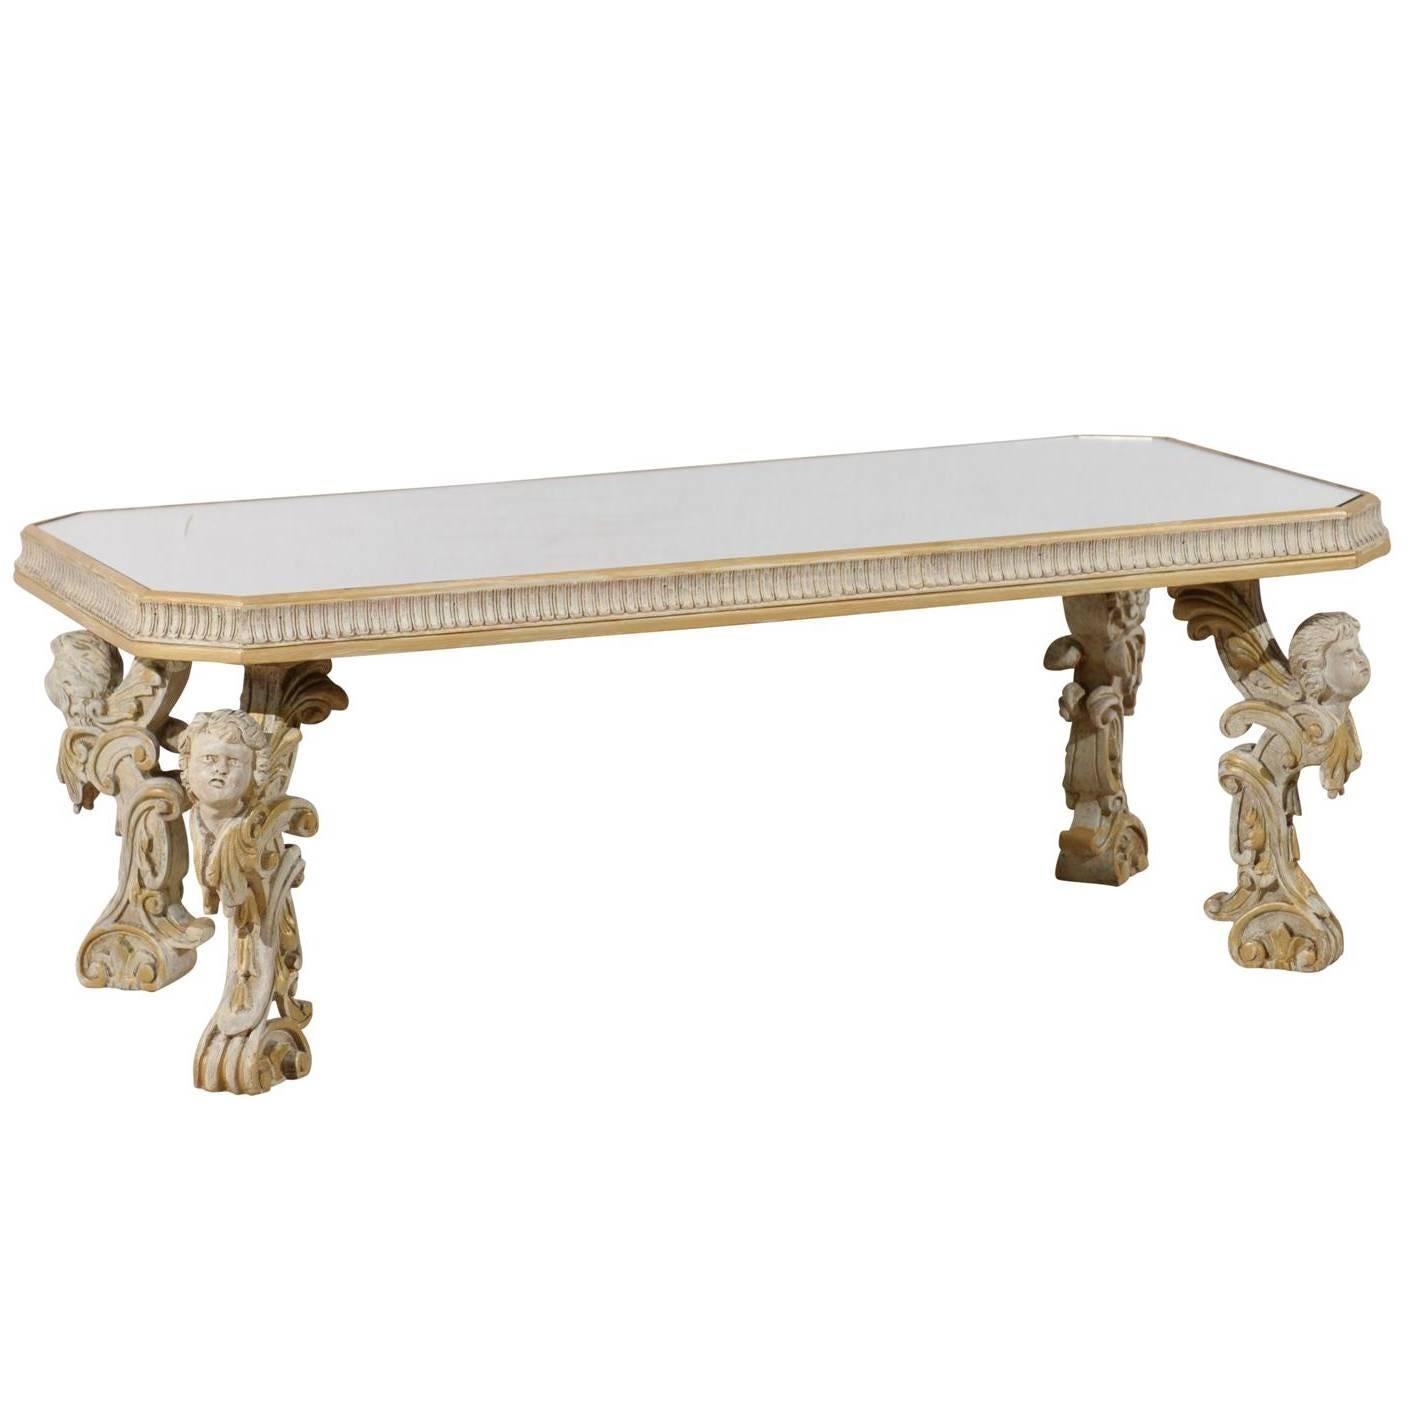 Italian Mirrored Top Coffee Table with Ornate Putti Carved Legs, Circa 1920s